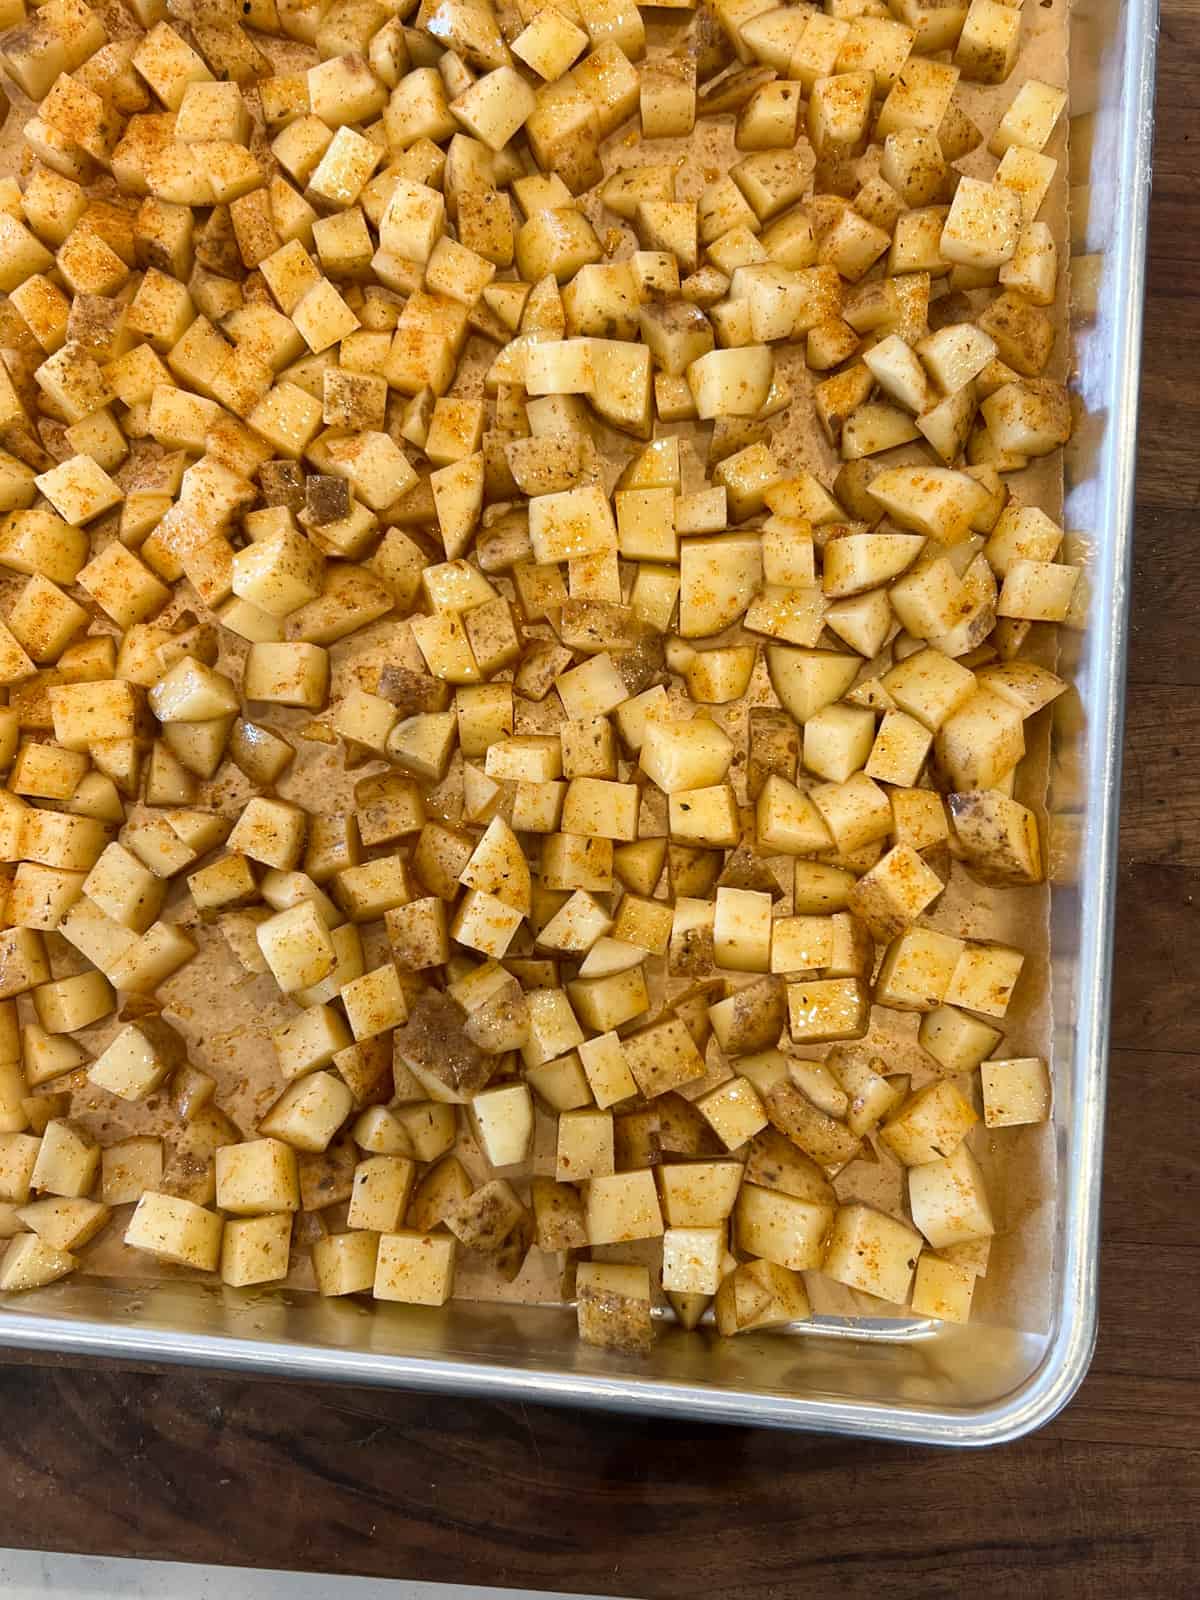 Diced raw potatoes seasoned and spread out on a baking sheet.